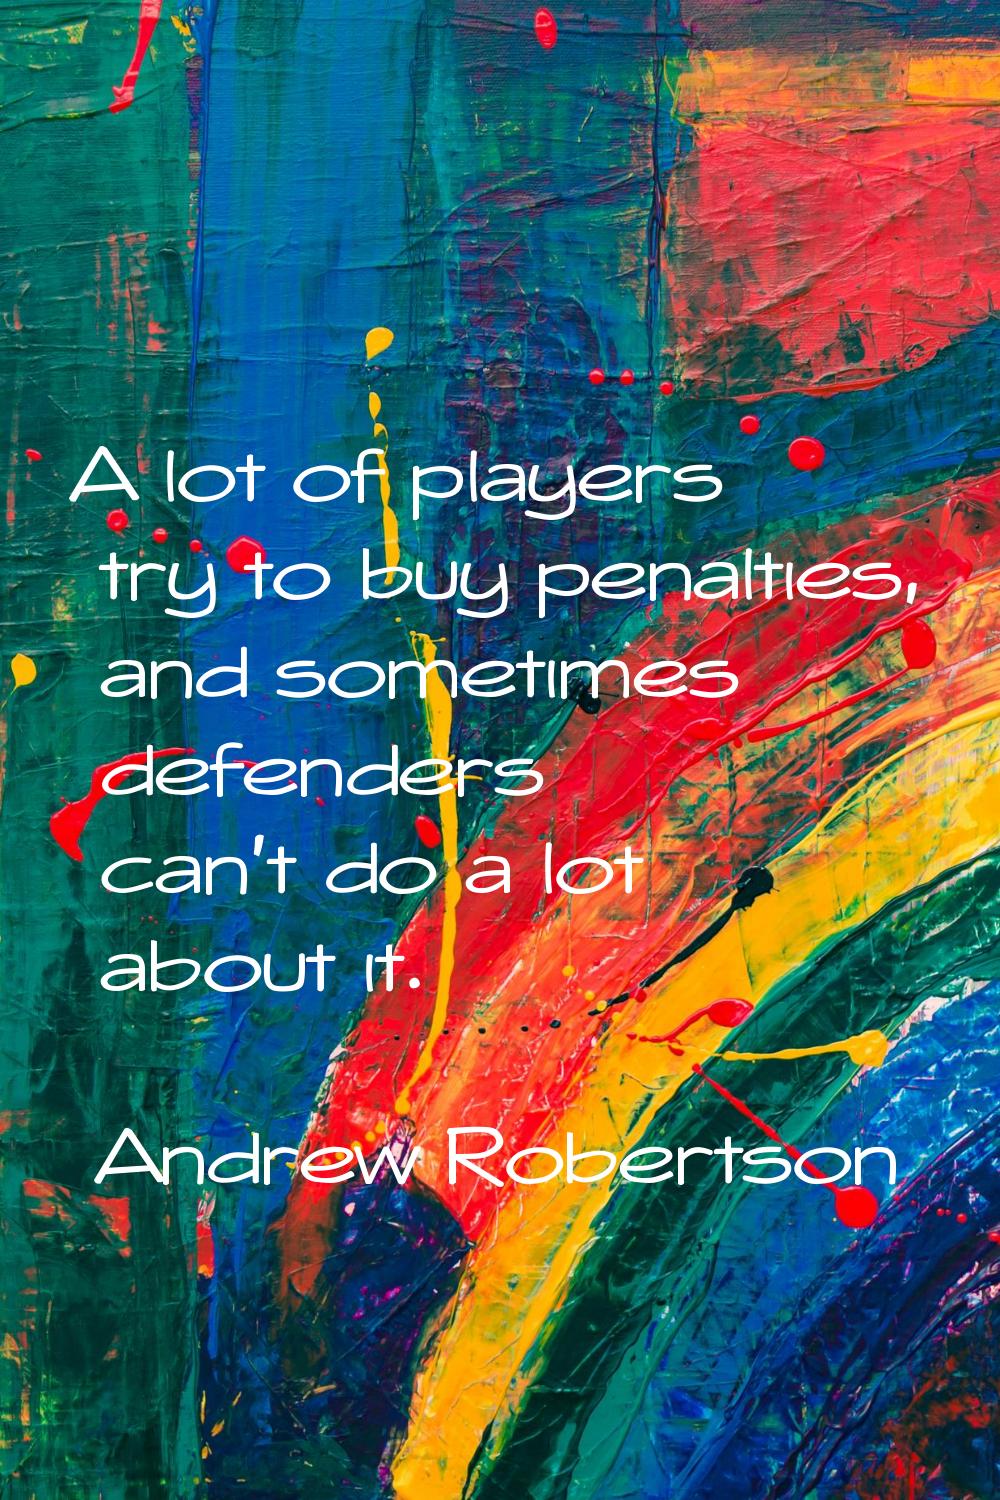 A lot of players try to buy penalties, and sometimes defenders can't do a lot about it.